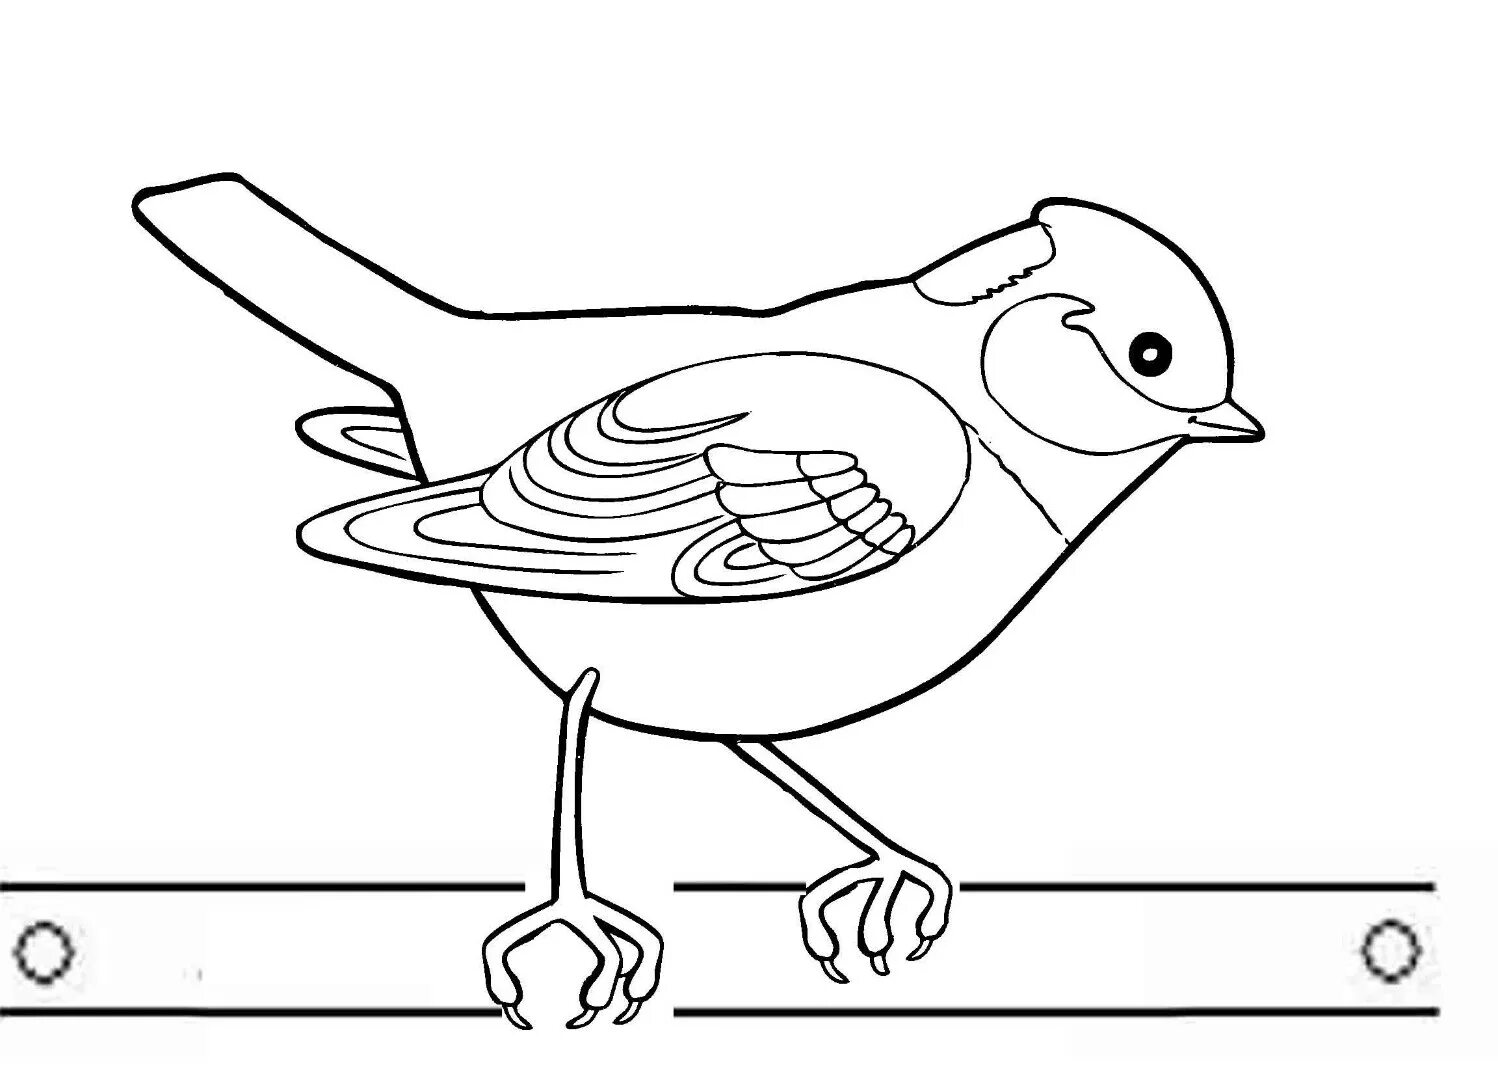 Cute tit coloring book for kids